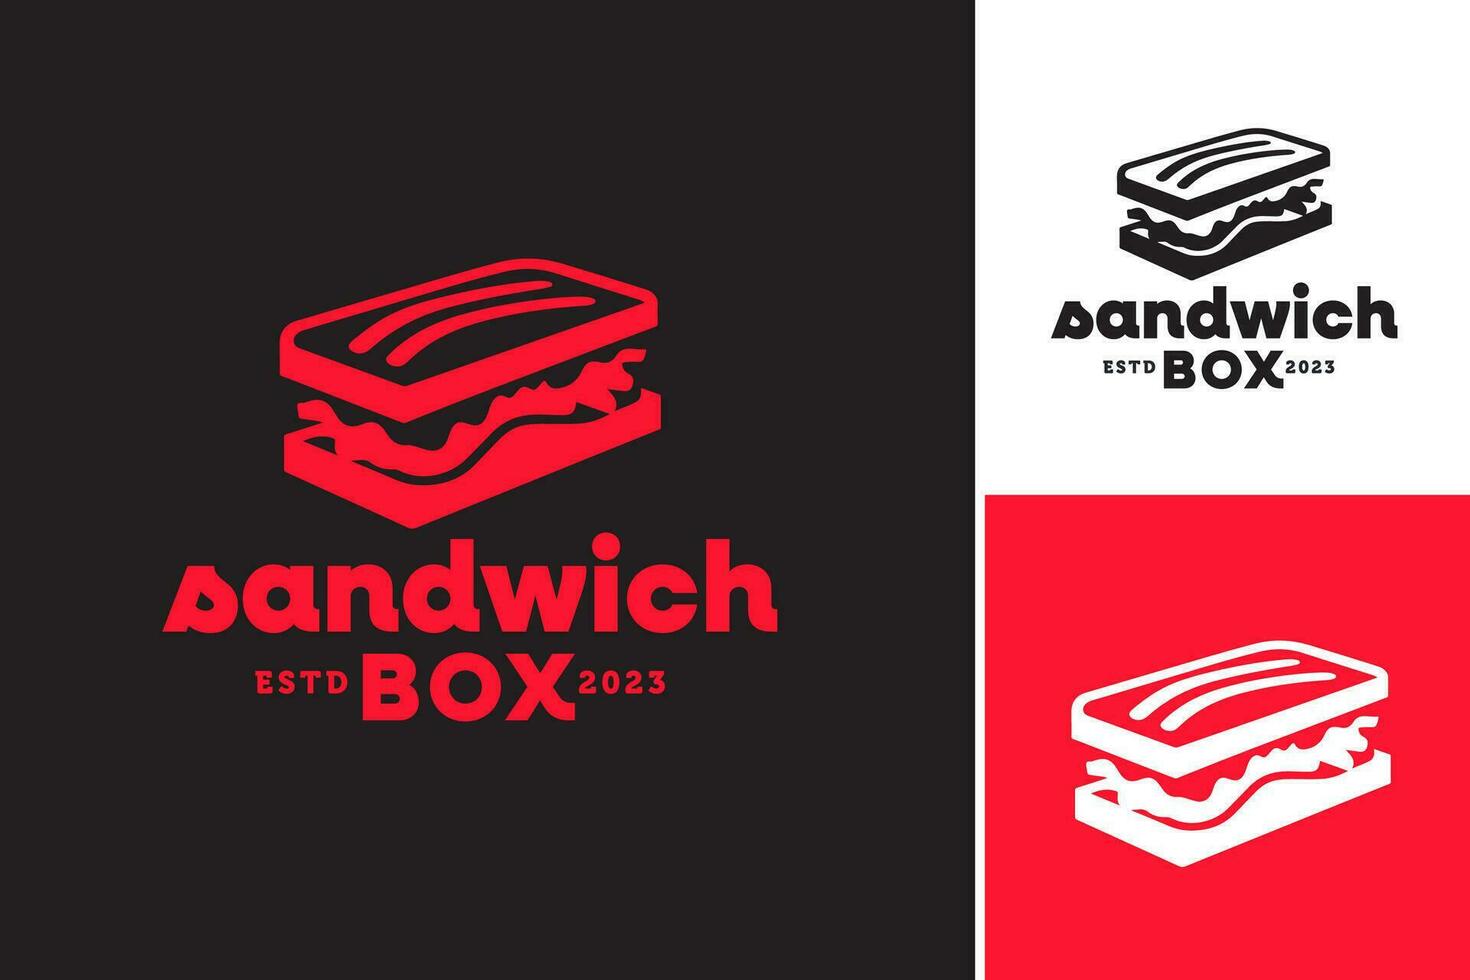 Sandwich box logo design refers to a design asset that features a logo suitable for a sandwich box or packaging. It is ideal for businesses in the food and beverage industry. vector